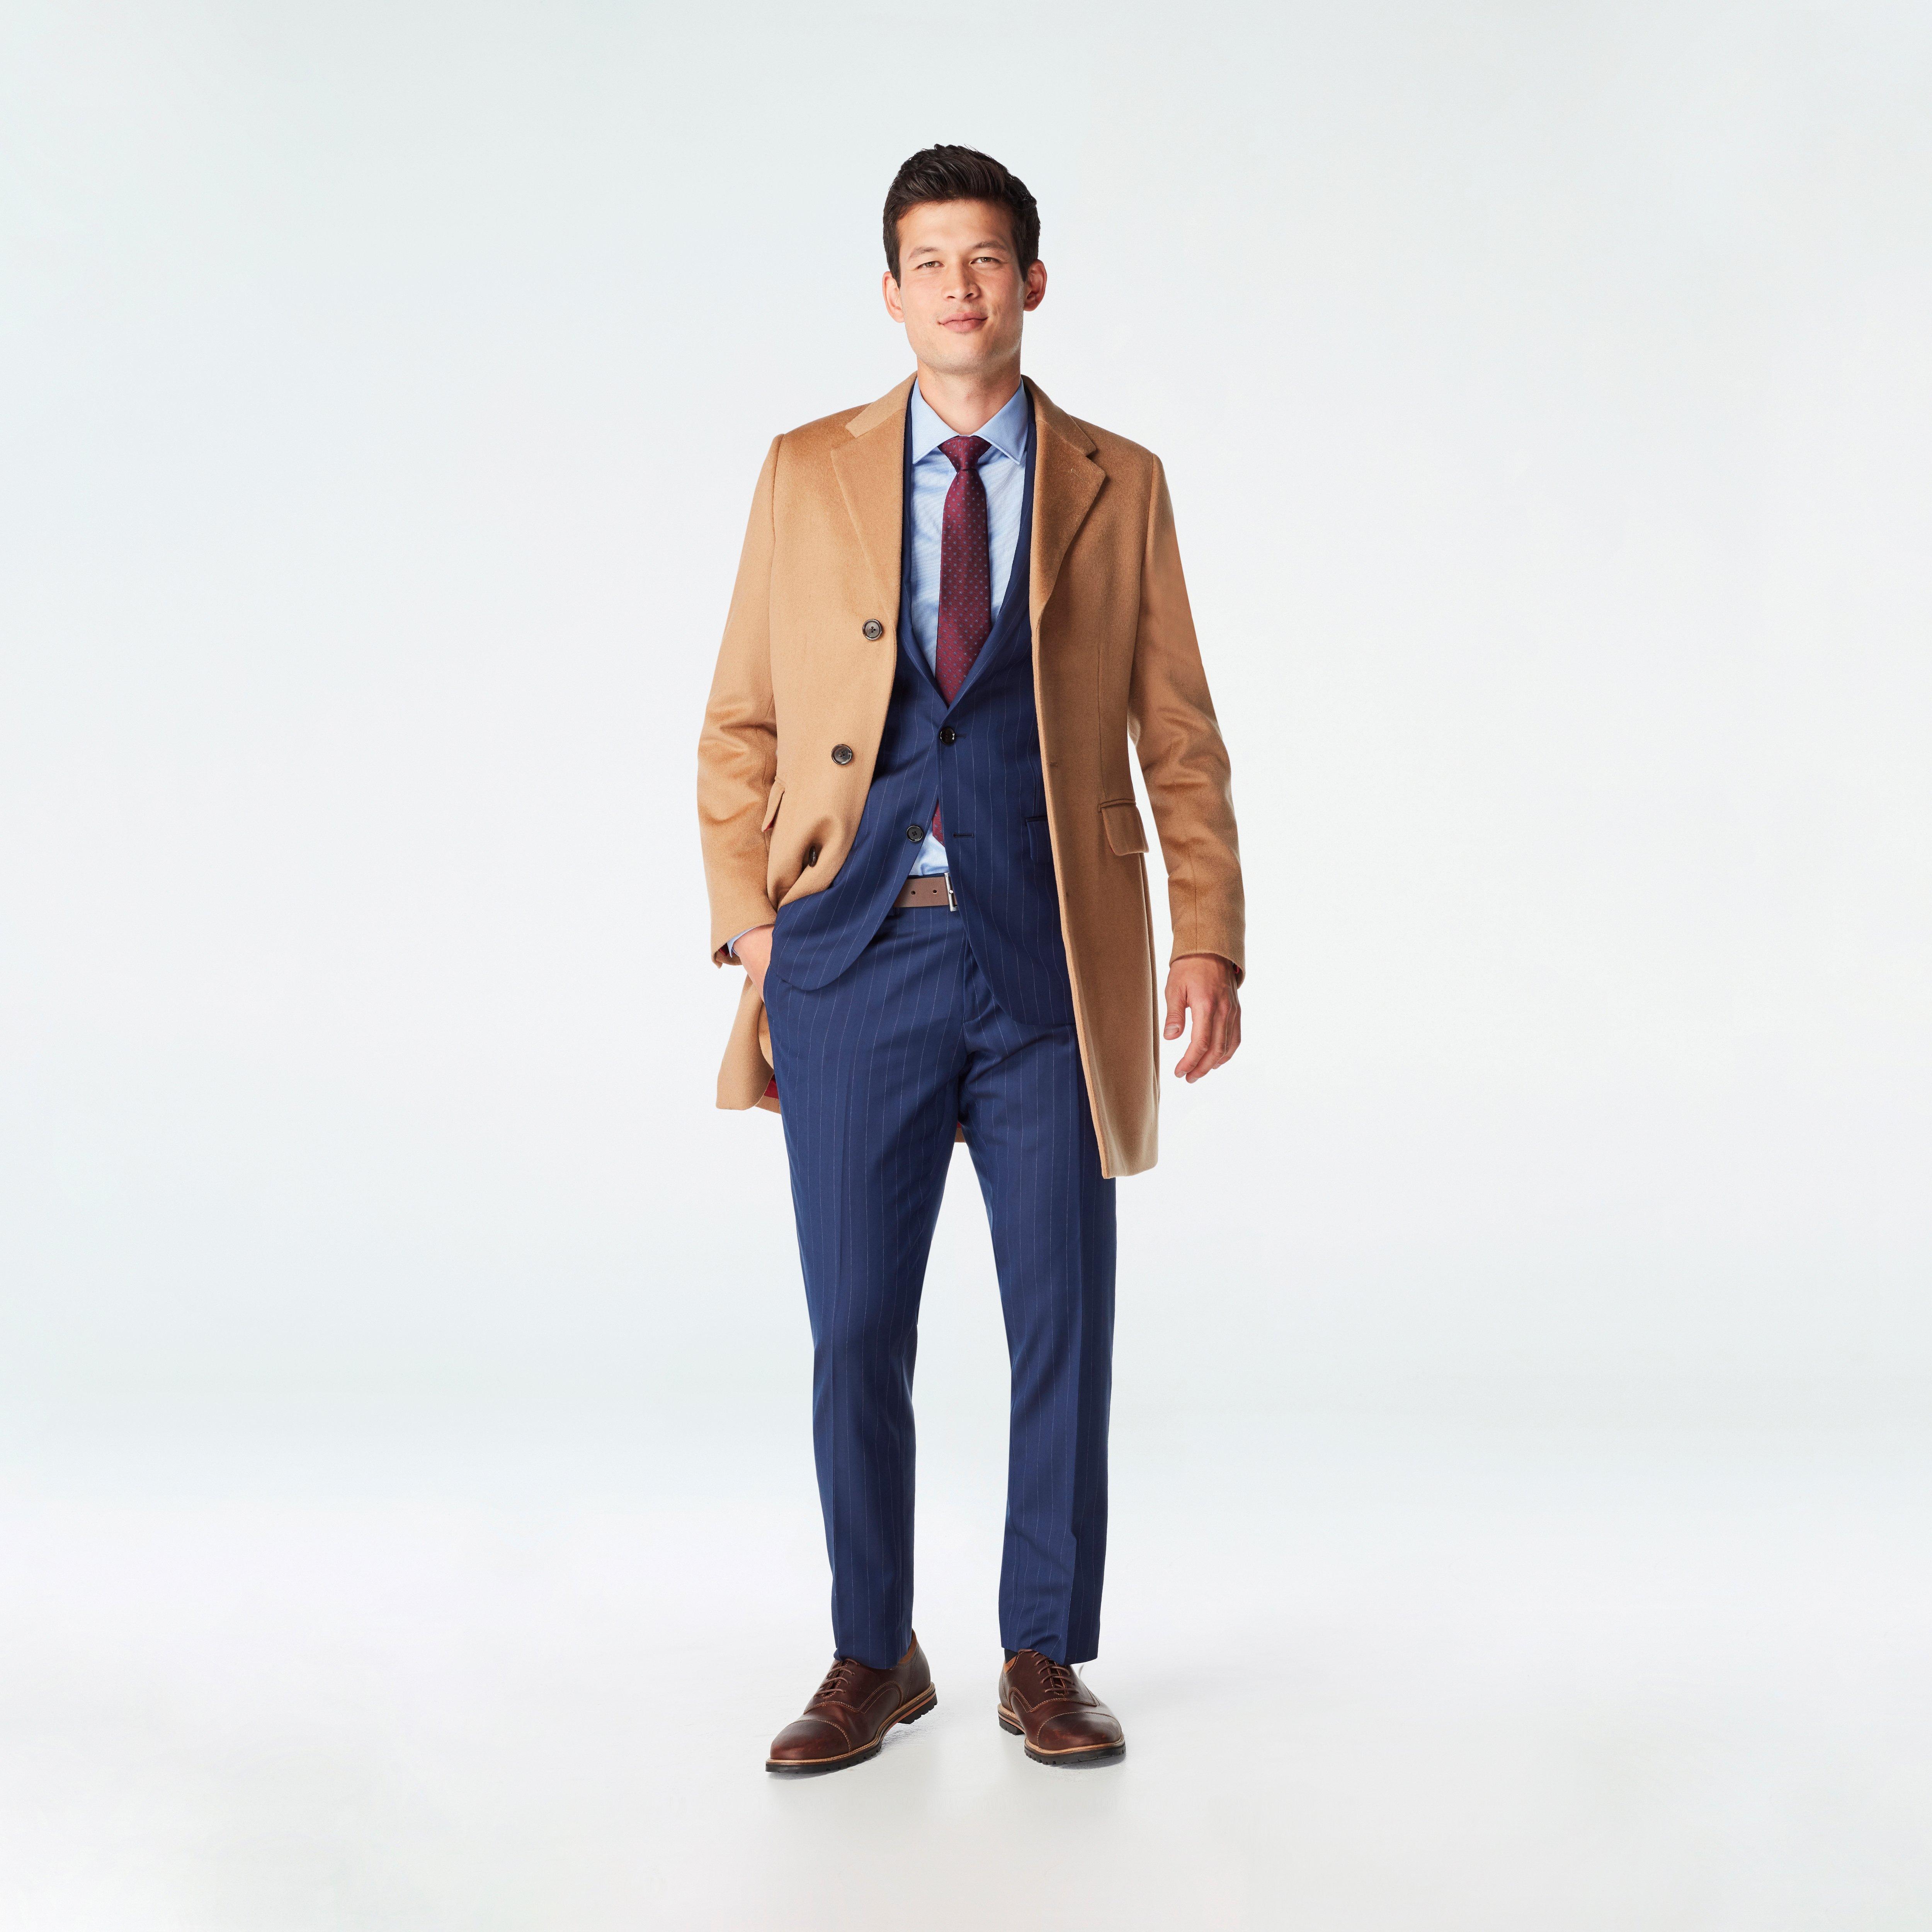 Indochino Men's Overcoat Review: What It's Like to Design Custom Outerwear